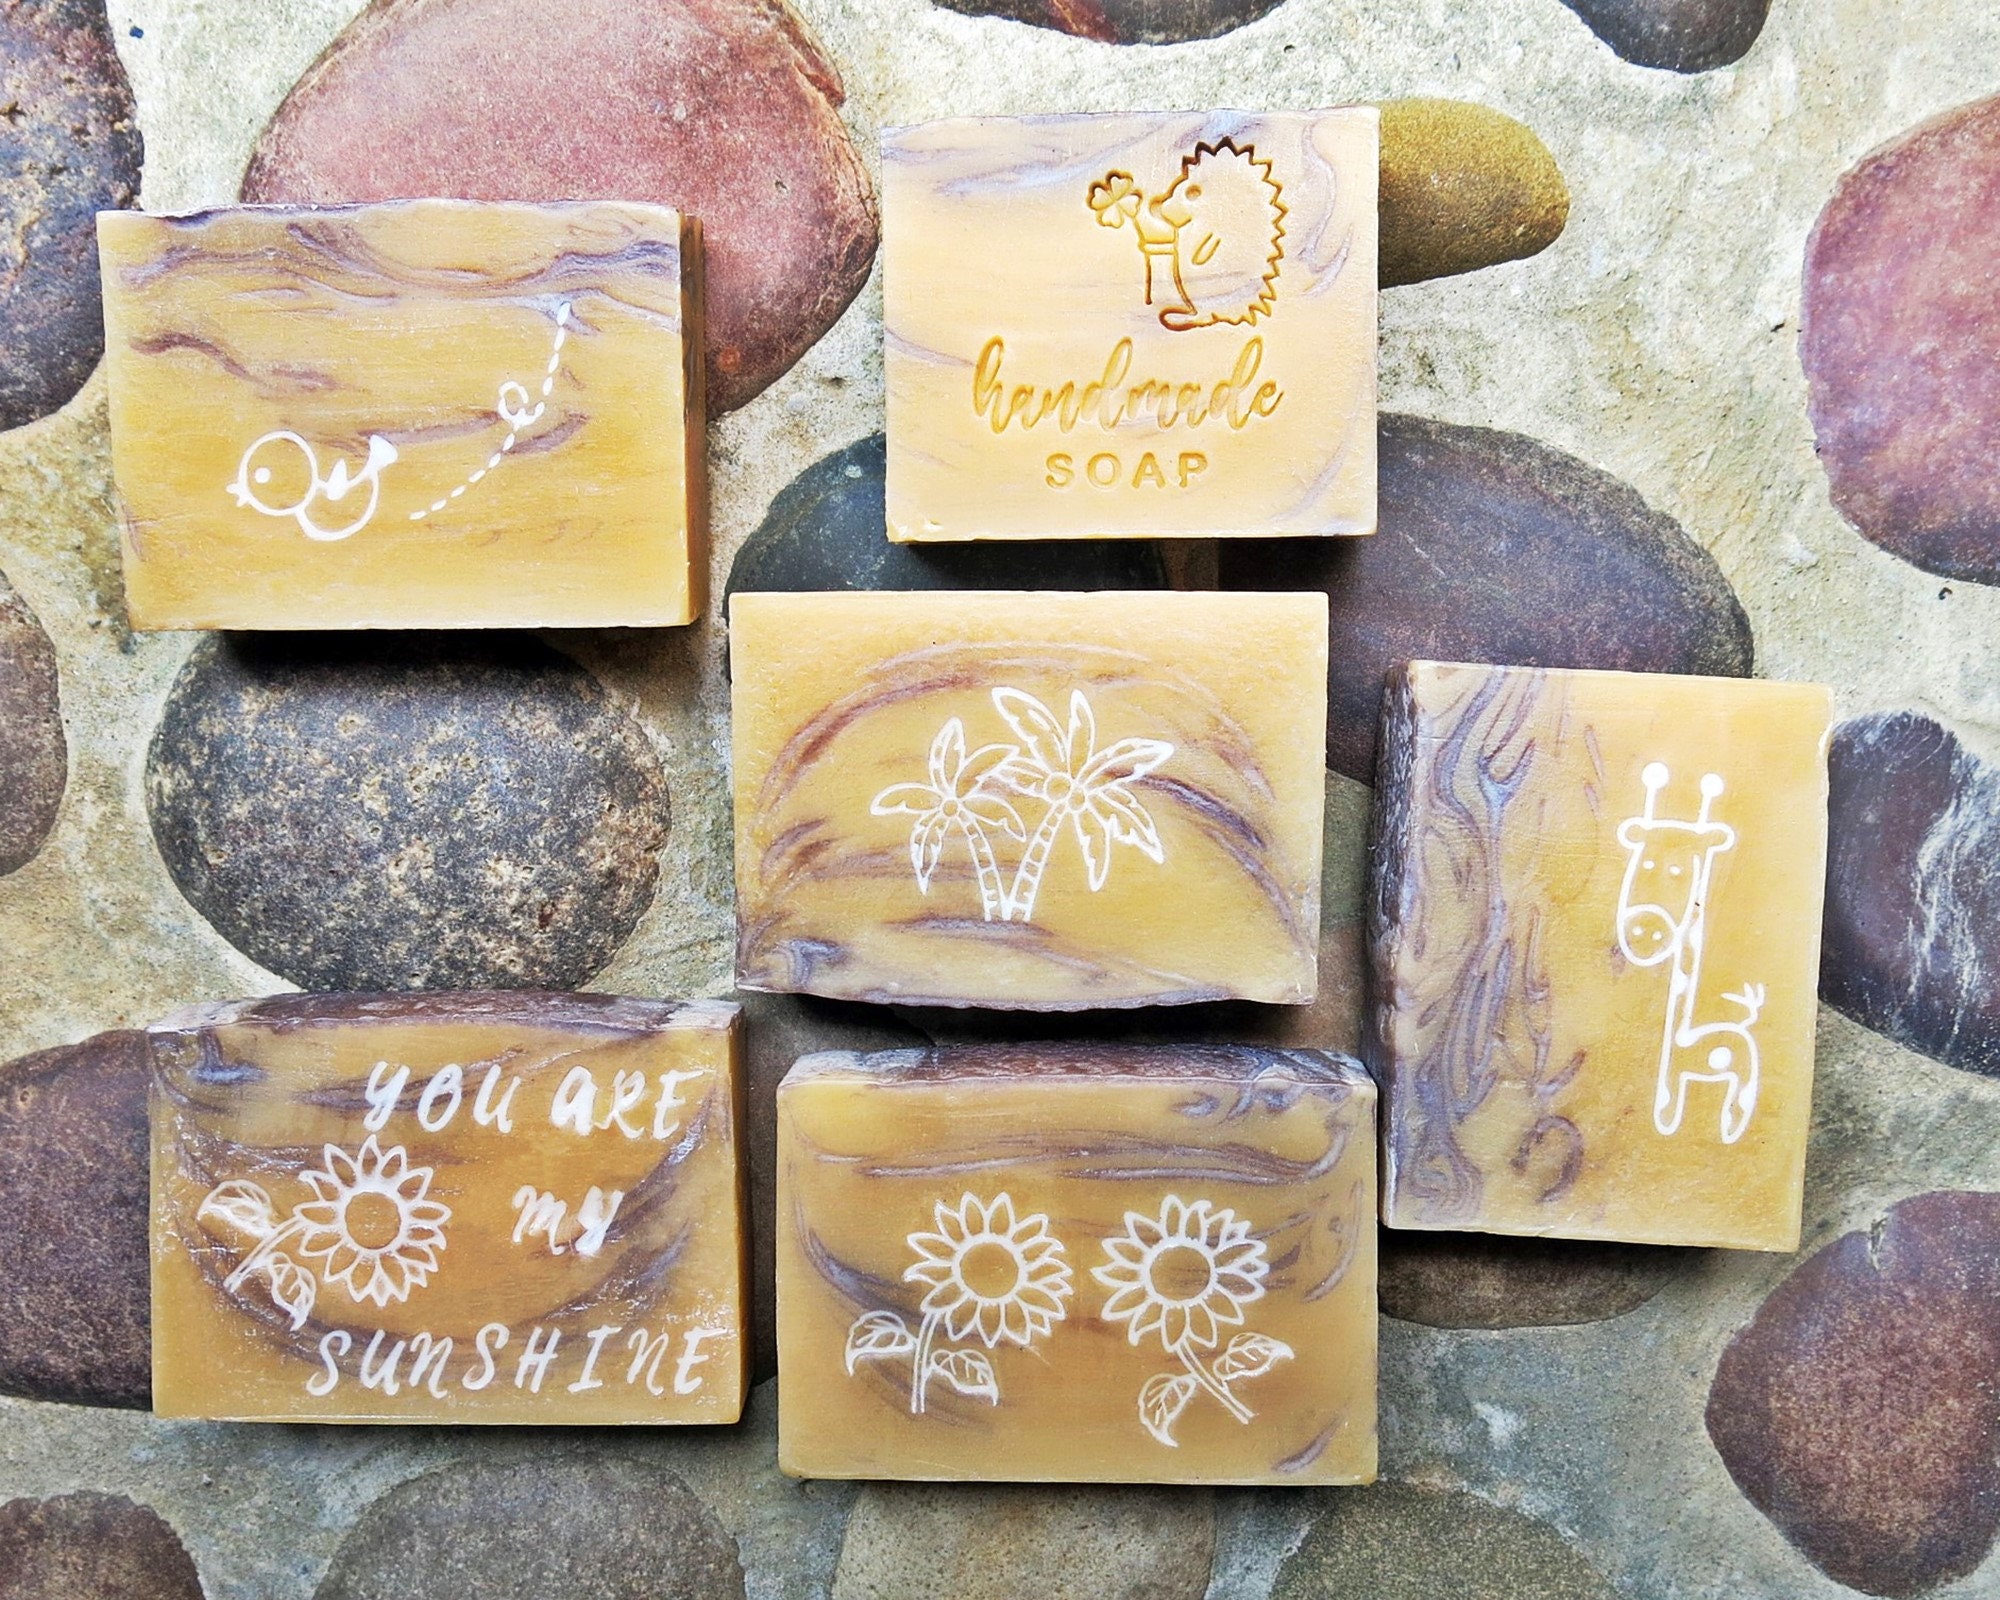 Good Night ZZZ Acrylic Soap Stamp / Cookie Stamp / Paper Stamp